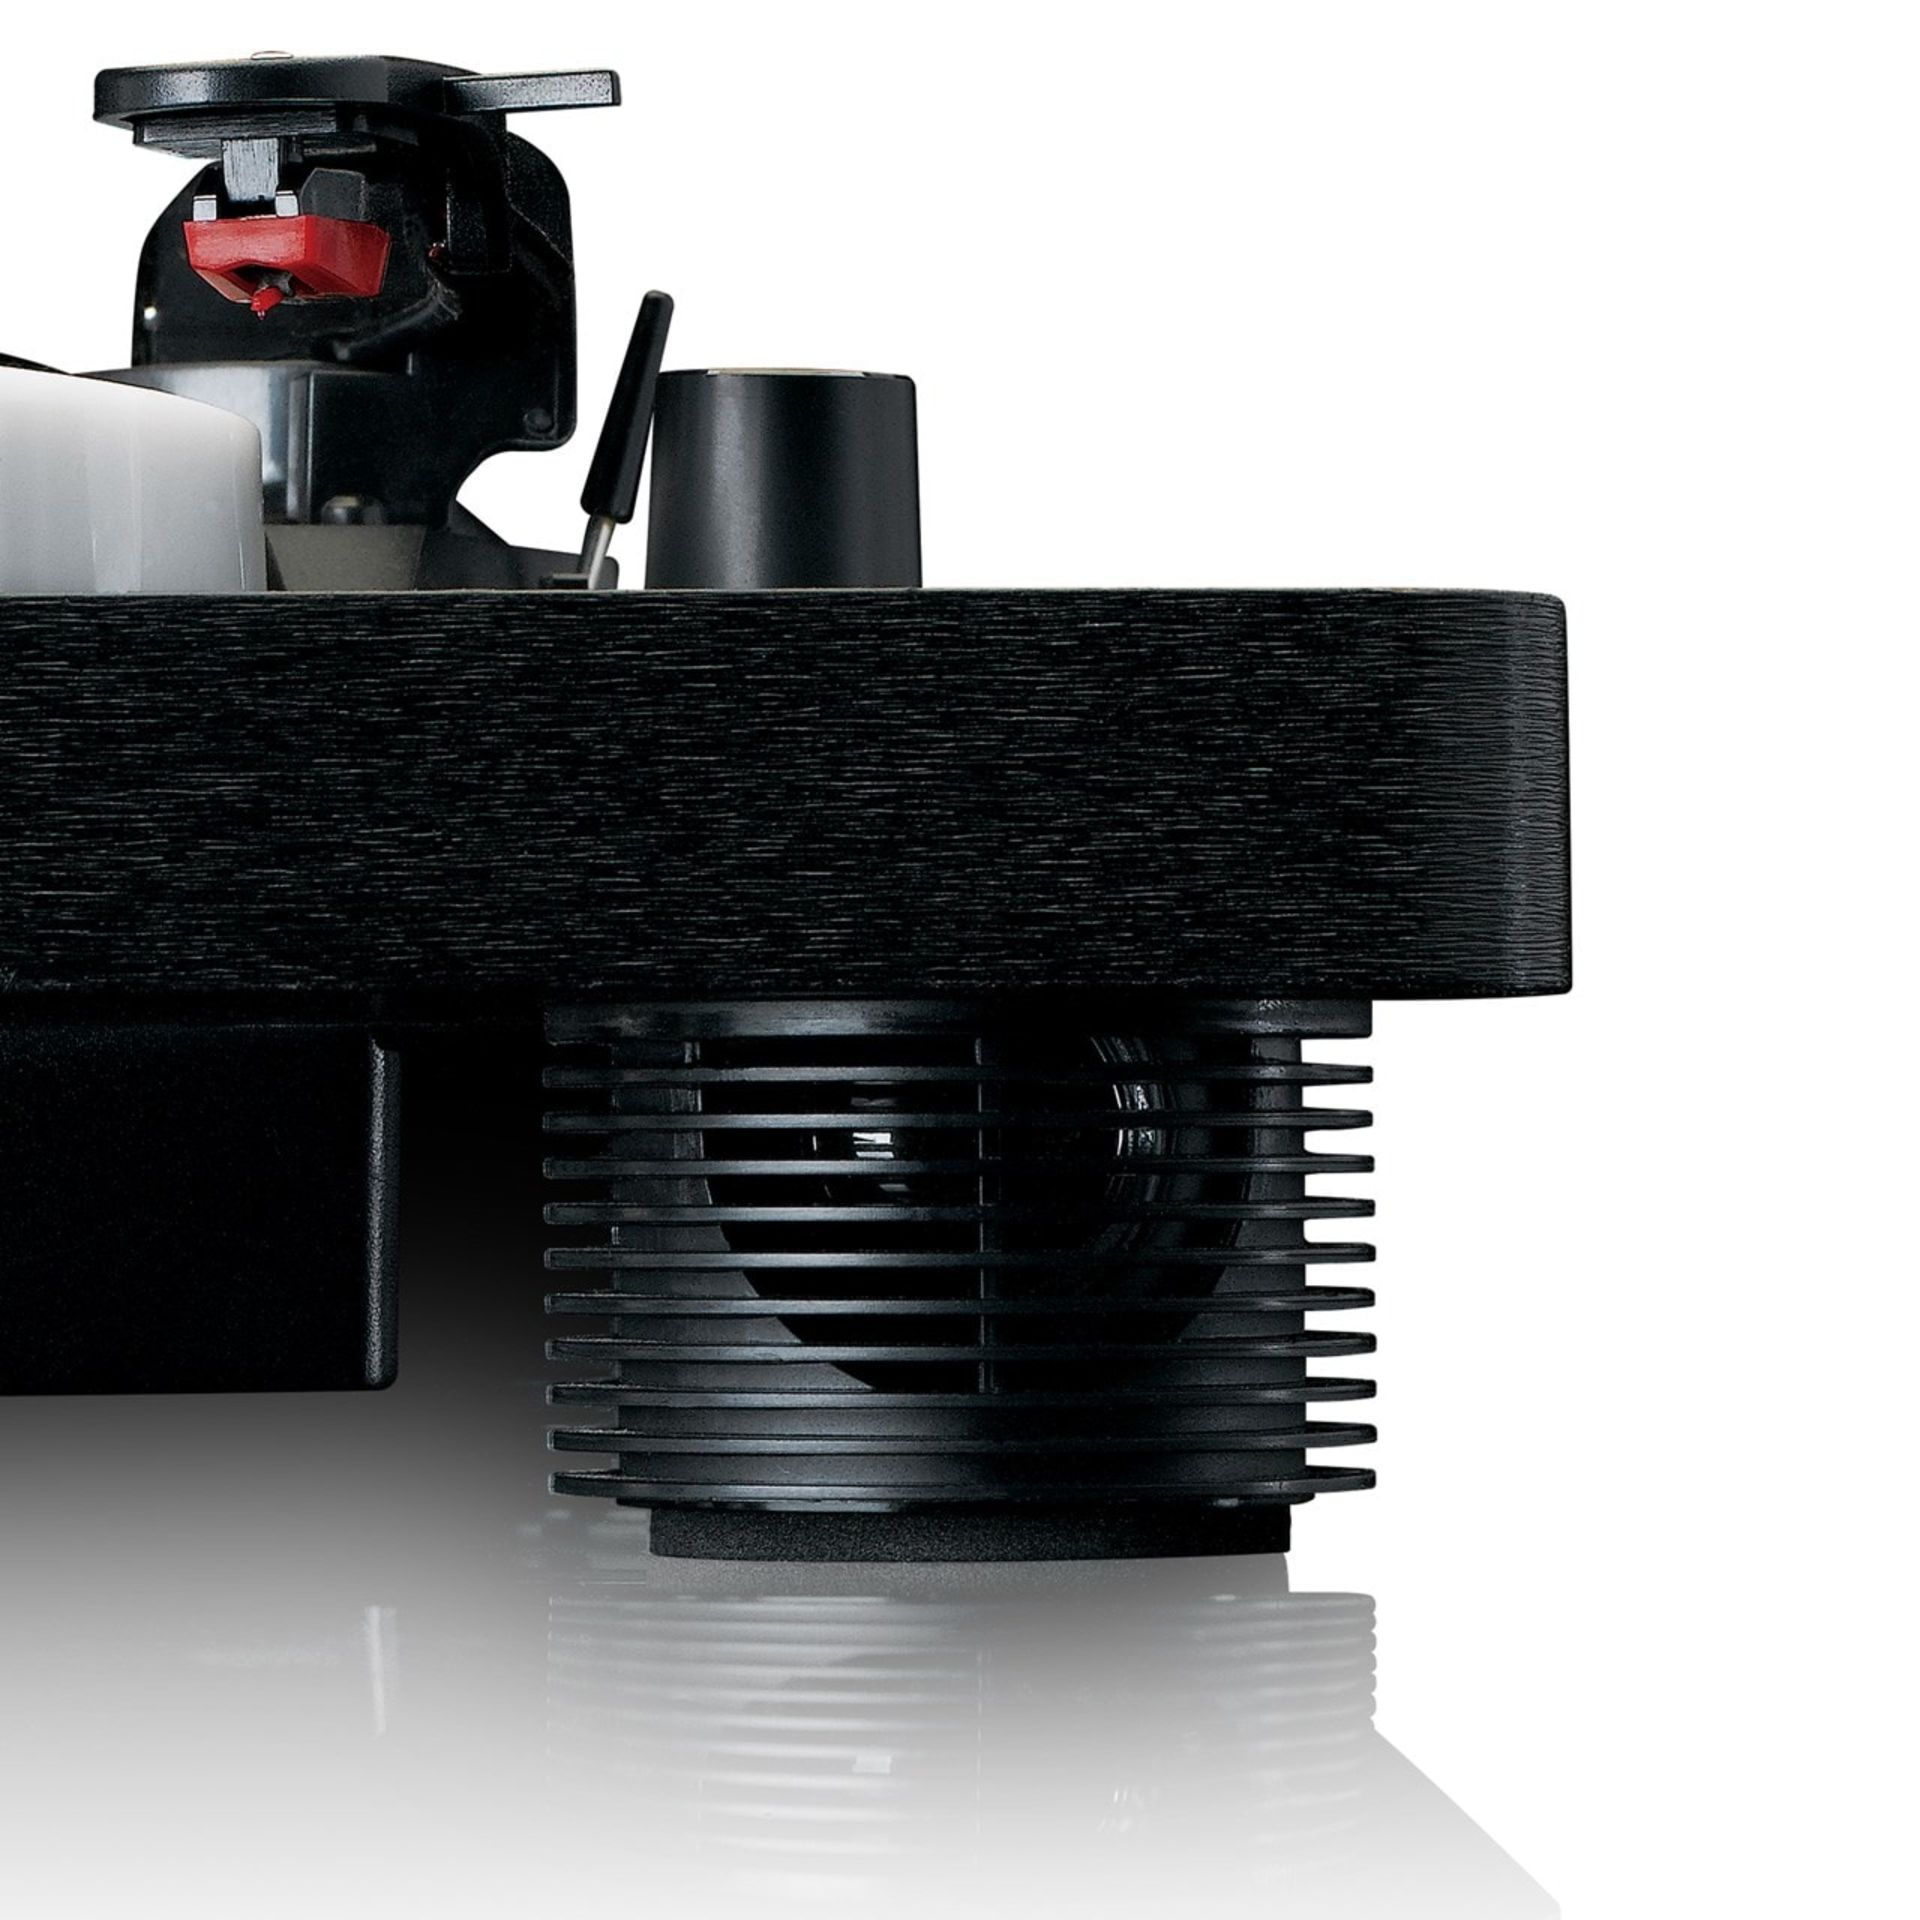 LENCO LS-50LED TURNTABLE WITH PC ENCODING WITH SPEAKERS, LIGHTS AND MUSIC DIGITISATION - RRP £199 - Image 6 of 6